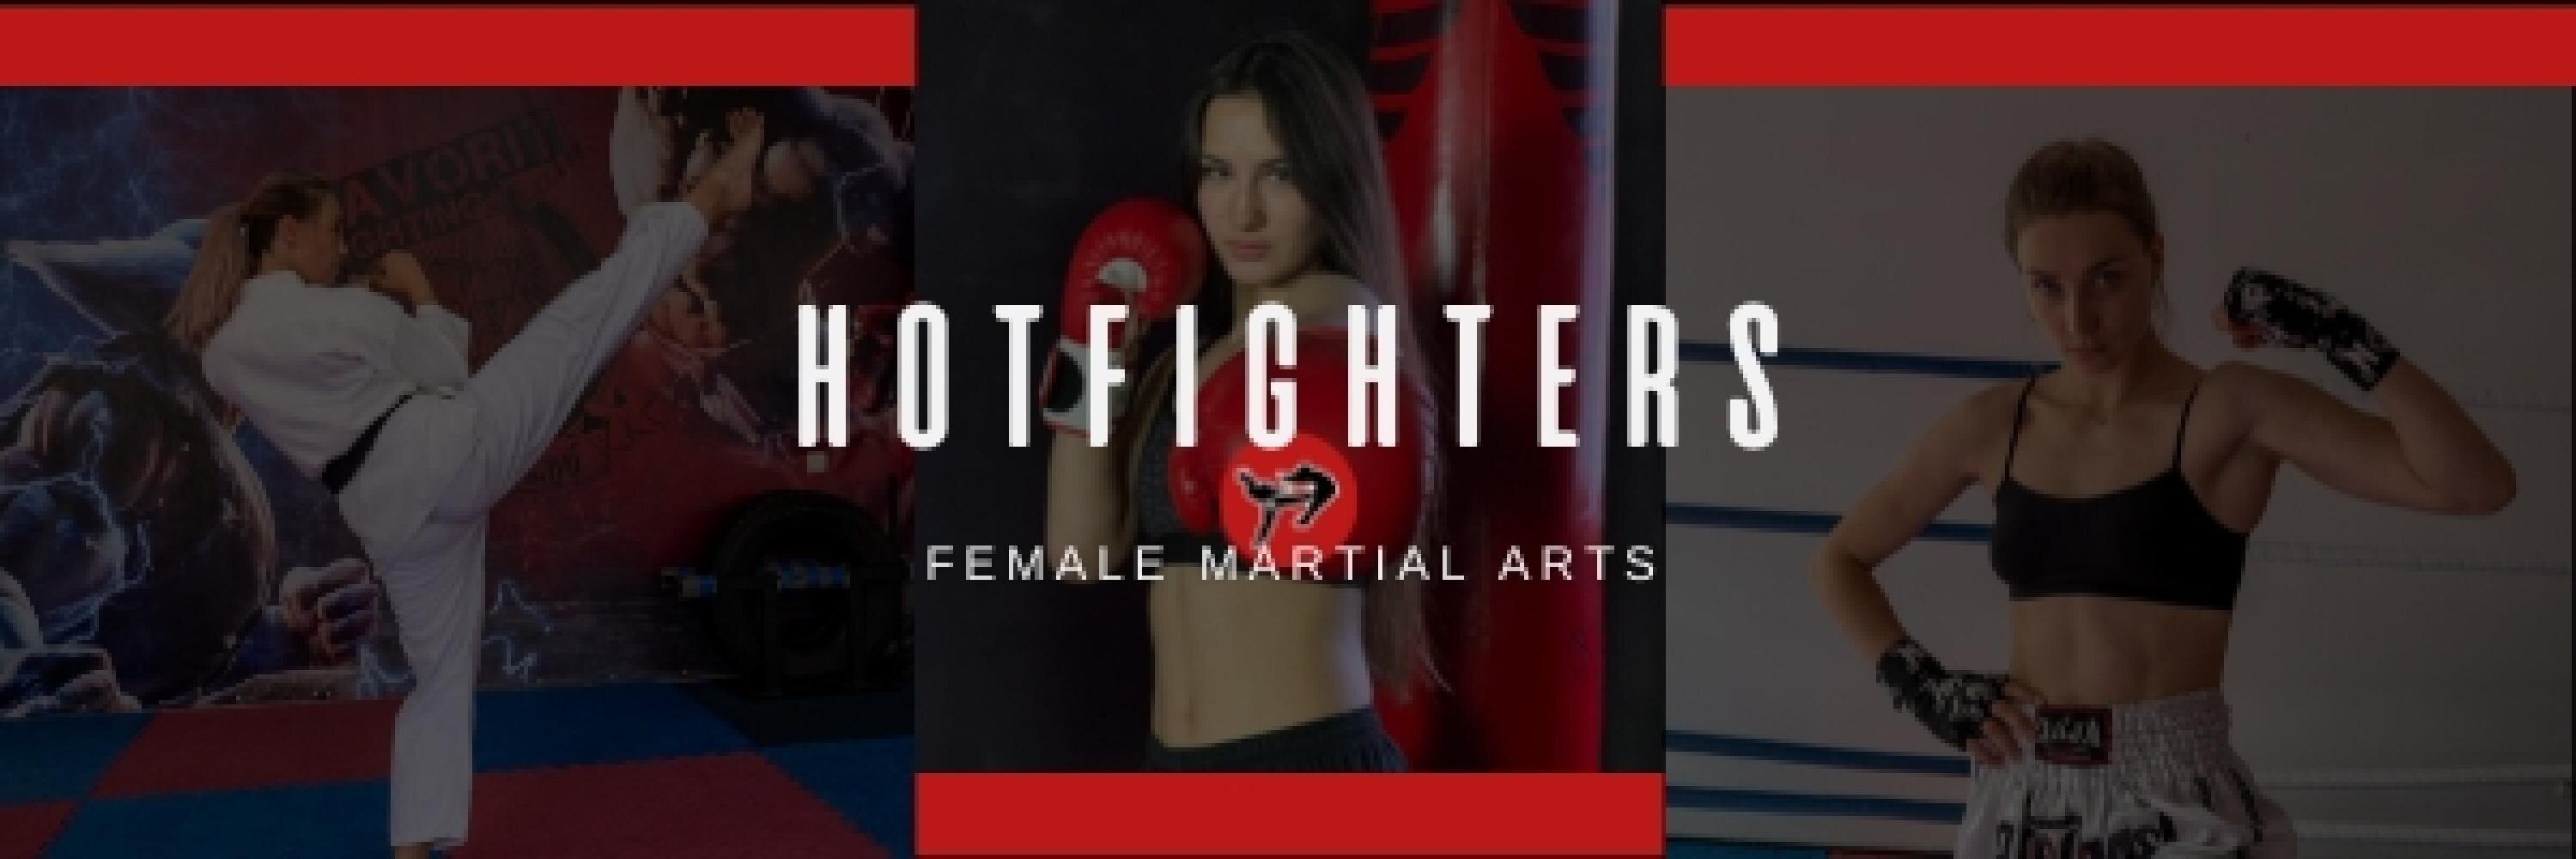 HOTFIGHTERS cover photo